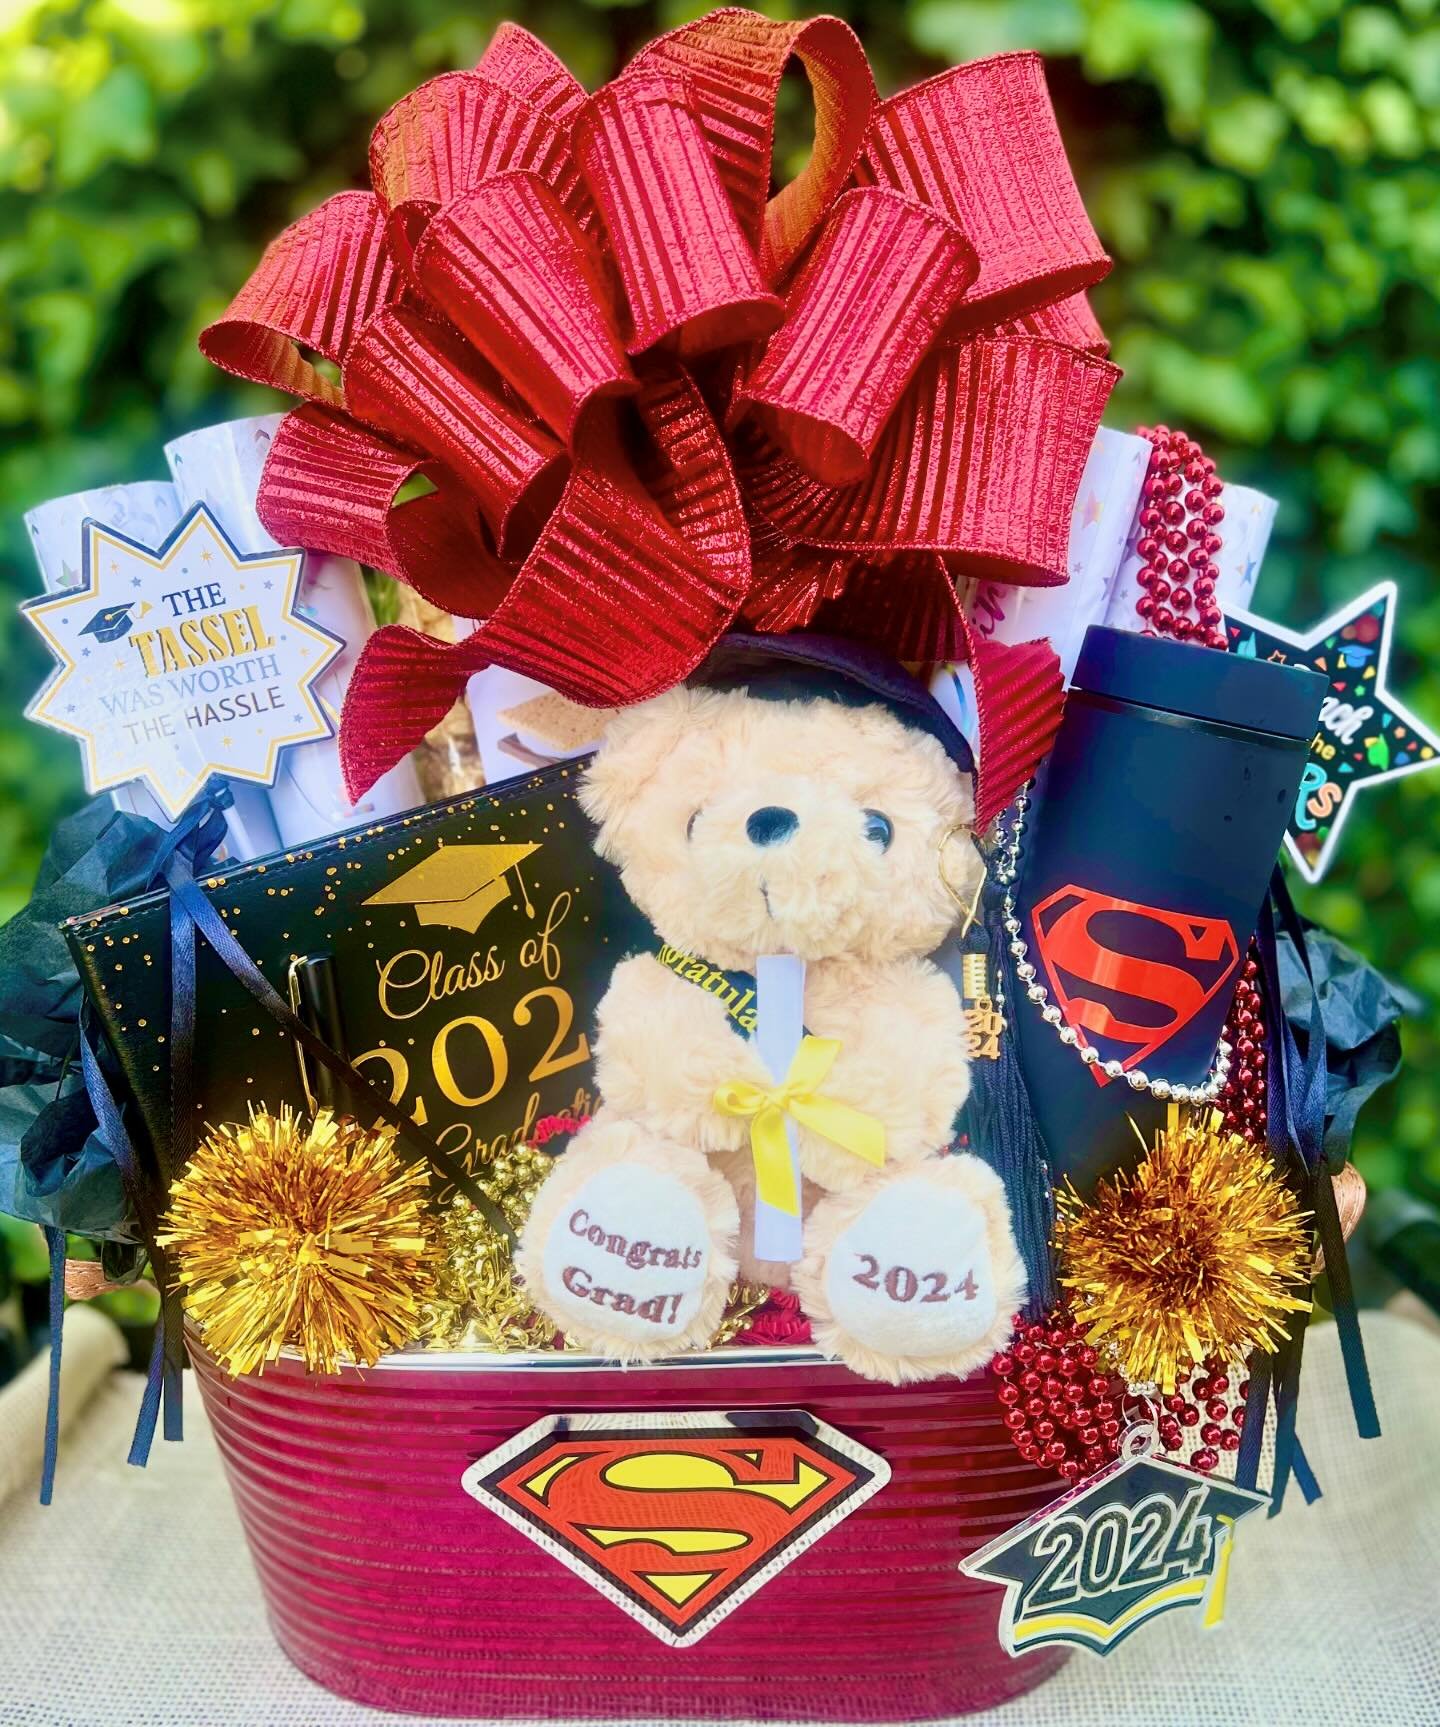 Super Grad! Submission to this weekend&rsquo;s Old Mill Center fundraiser from Anneliese Gast from Cadwell Realty Group. Check it out and bid on it in the Realtor Challenge section of the silent auction on Saturday.